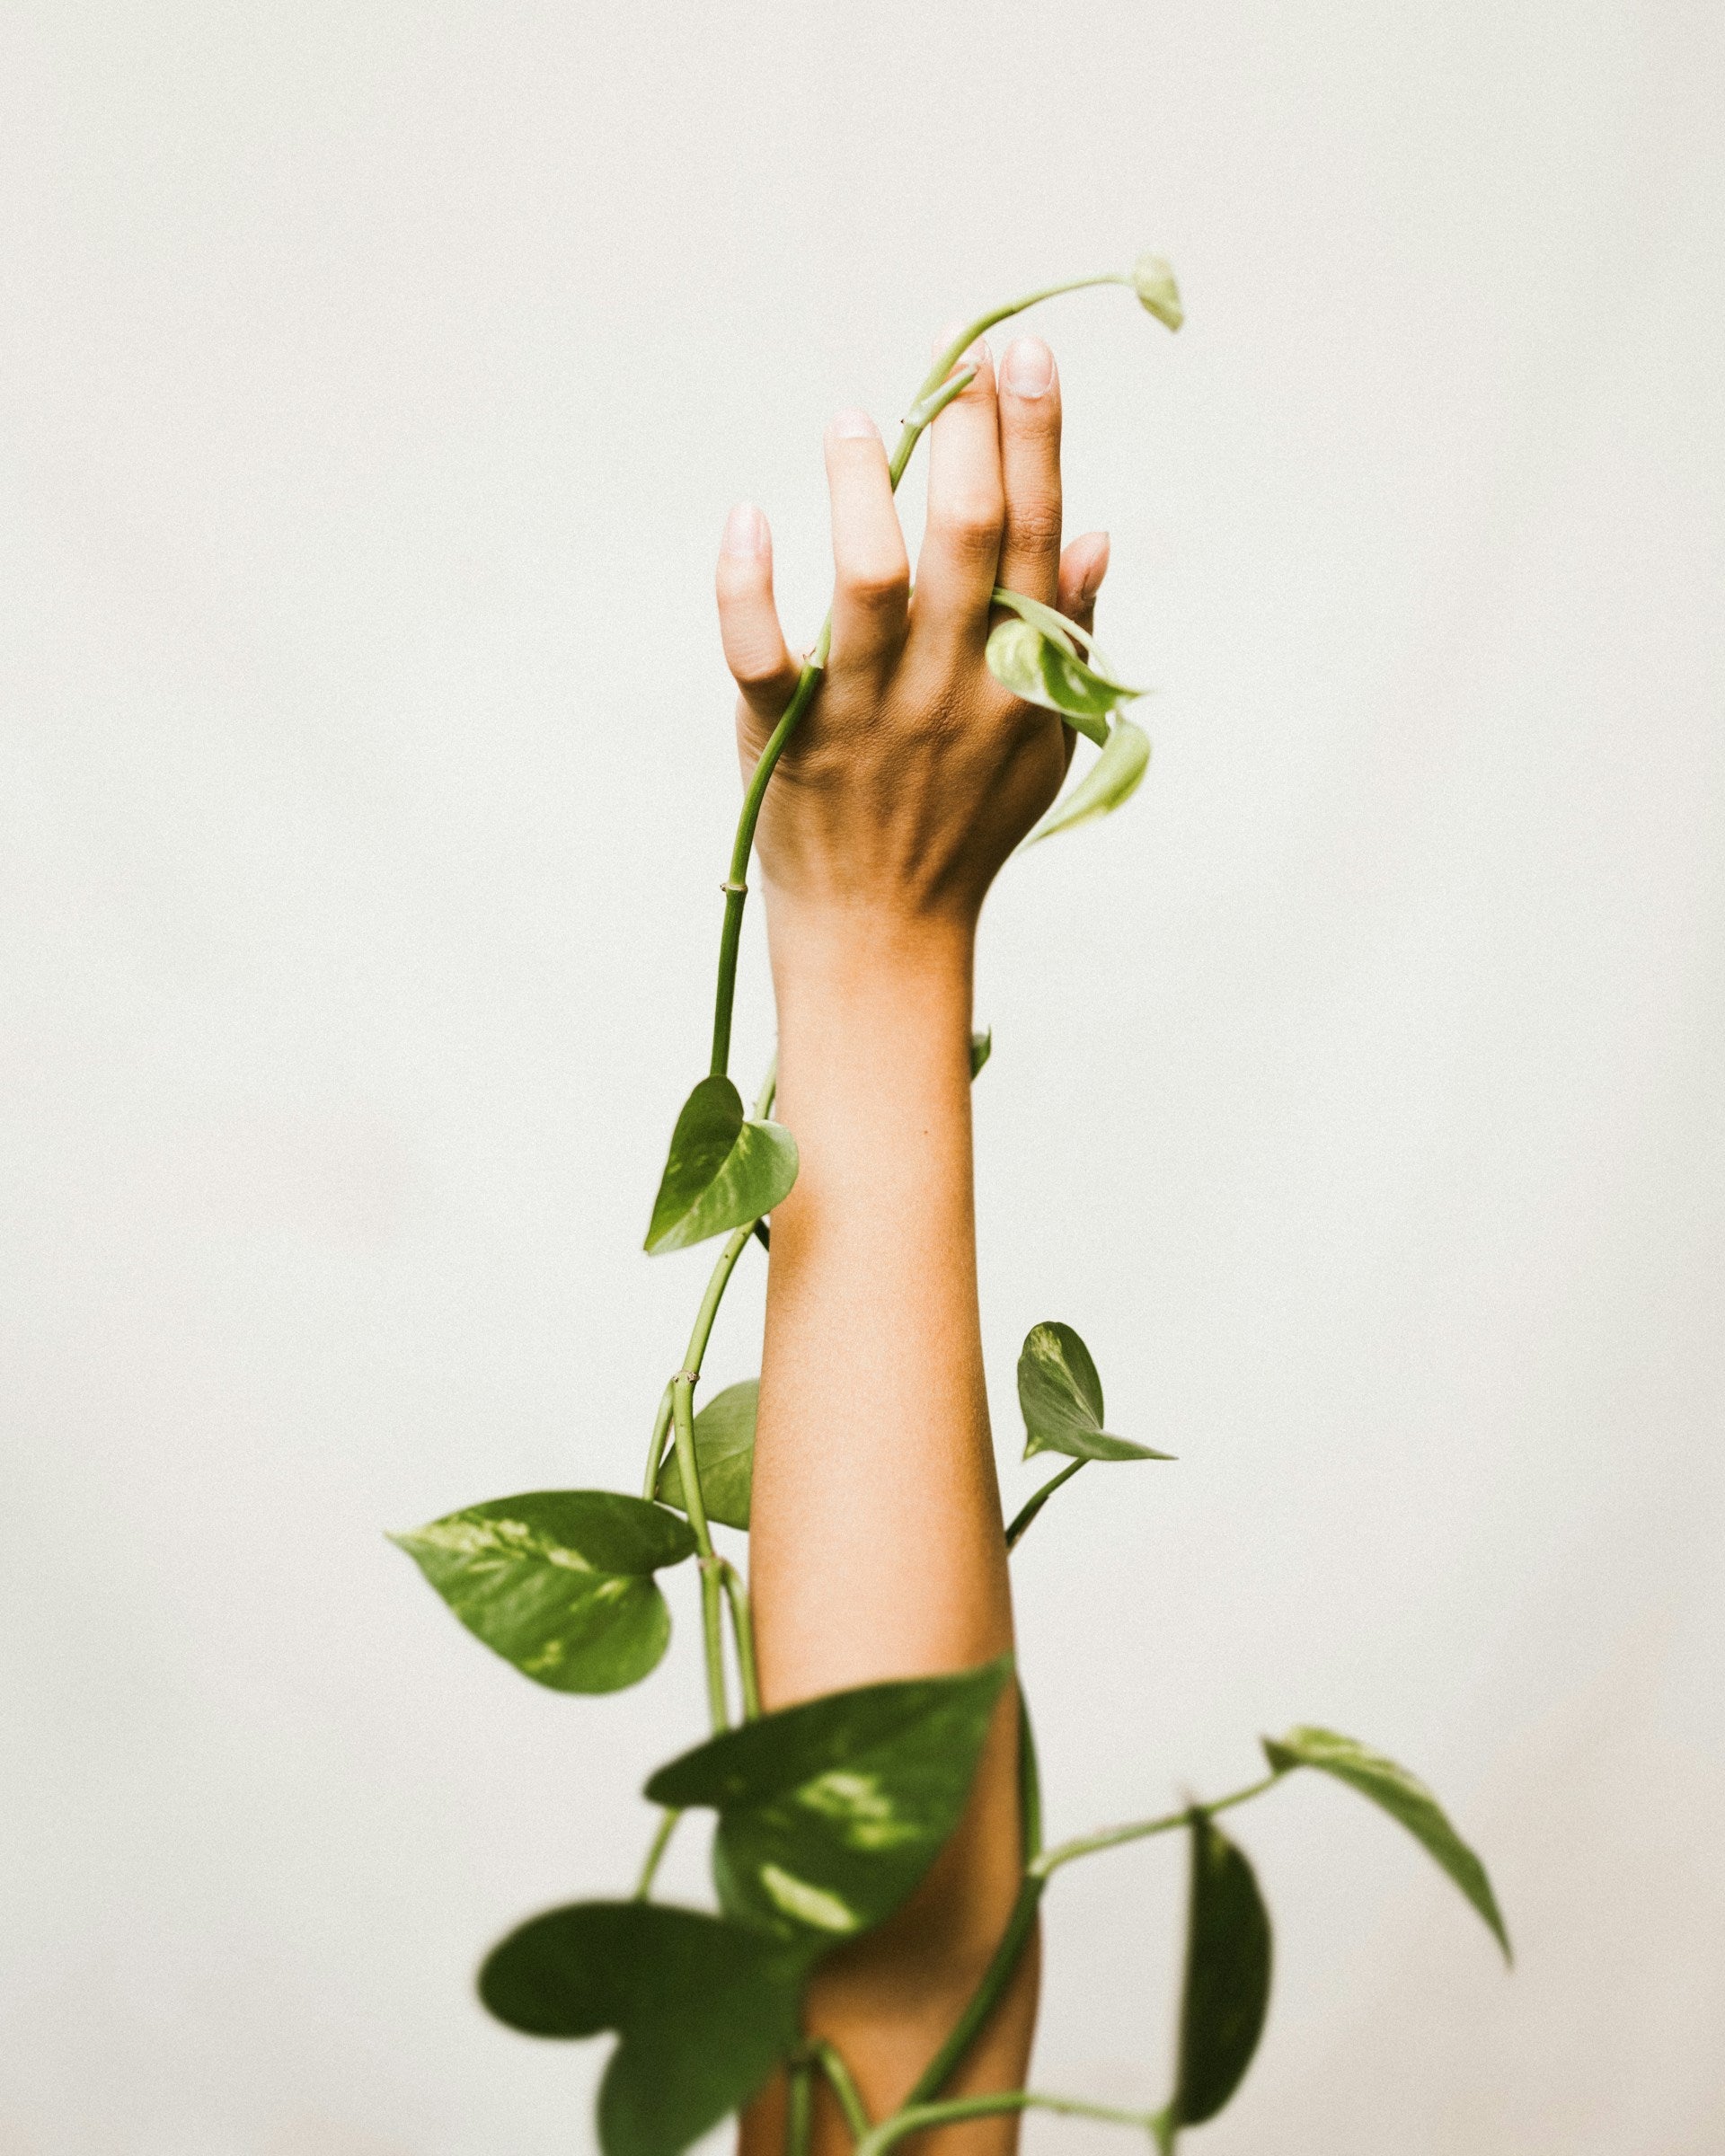 A hand reaching up with a vine of a pathos plant wrapped around the person's arm